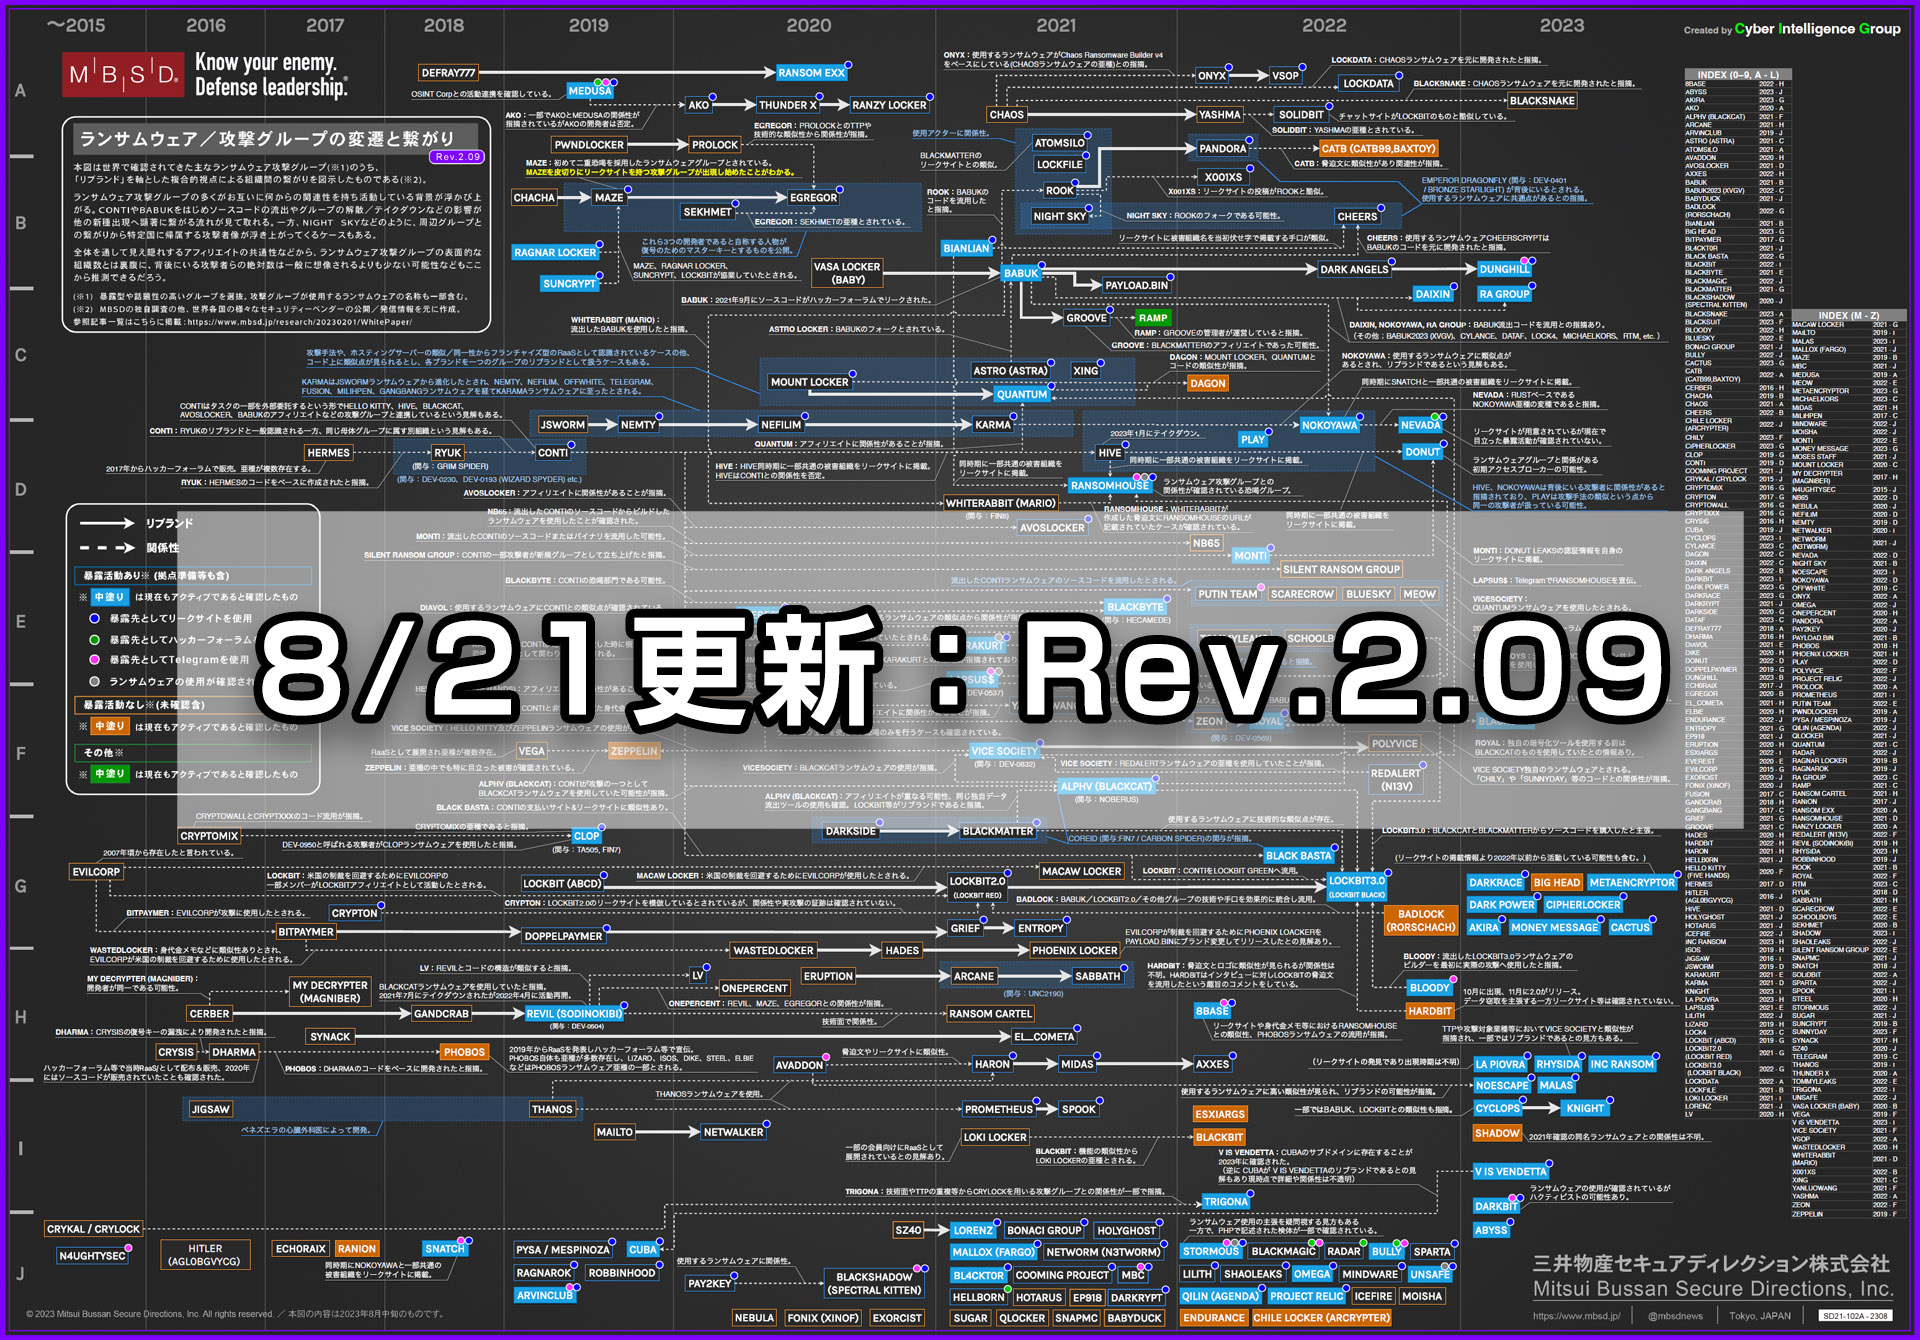 Thumb_1920_MBSD_History_of_ransomware_group_connections_and_transitions_JPN_Rev.2.09.jpg